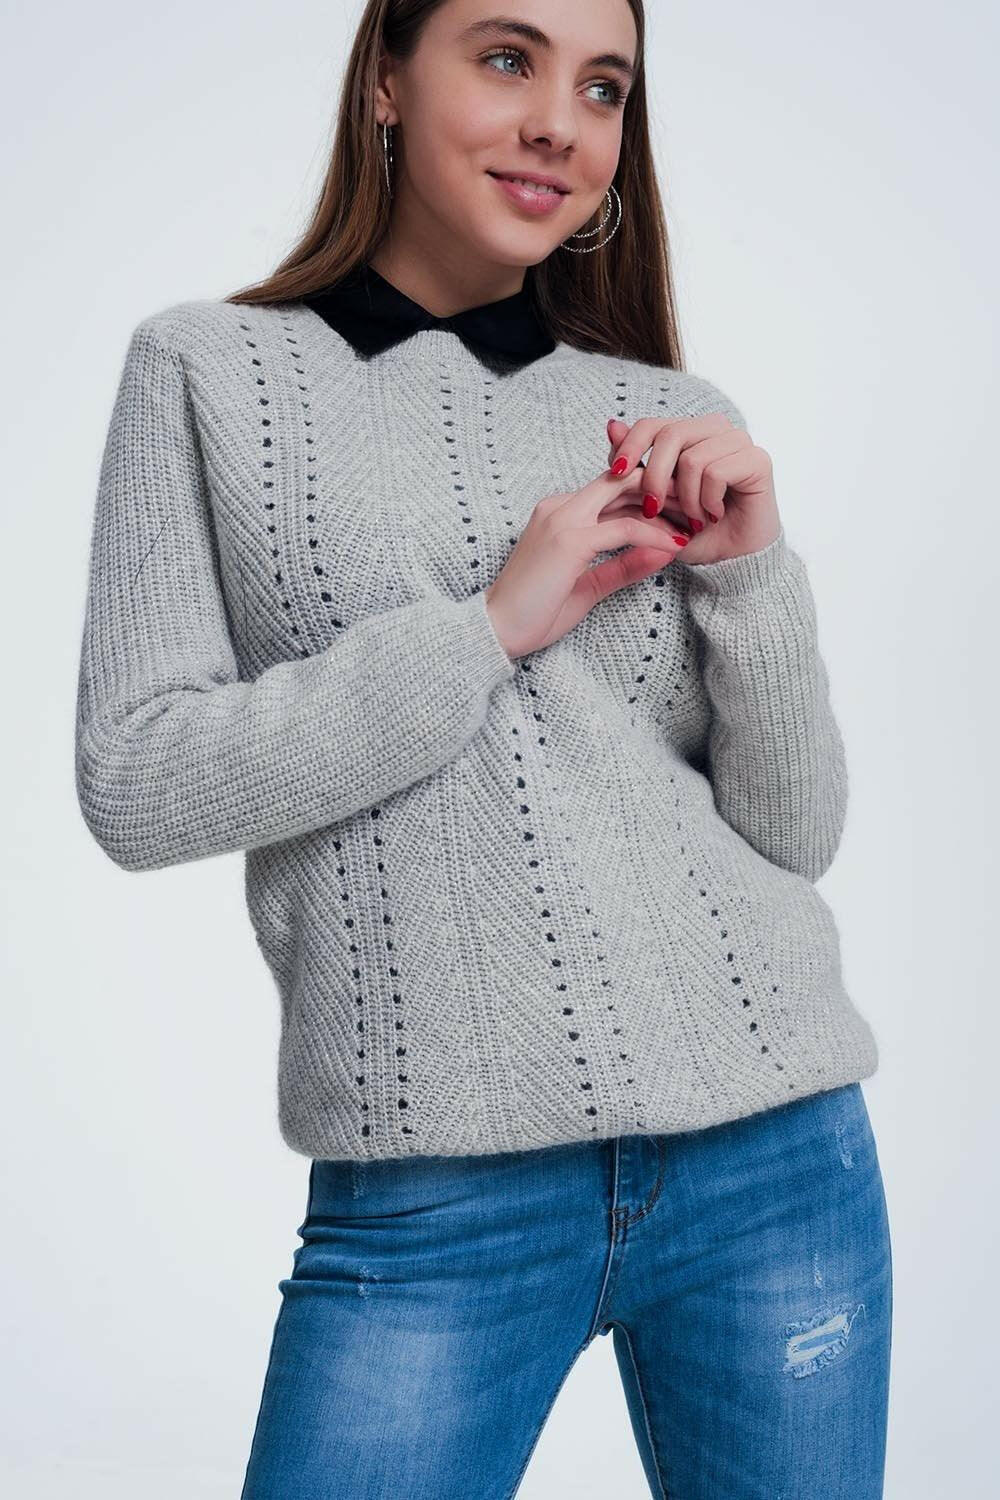 Gray Sweater With Knitted Stripe Detail - GENUINE AUTHENTIC BRAND LLC